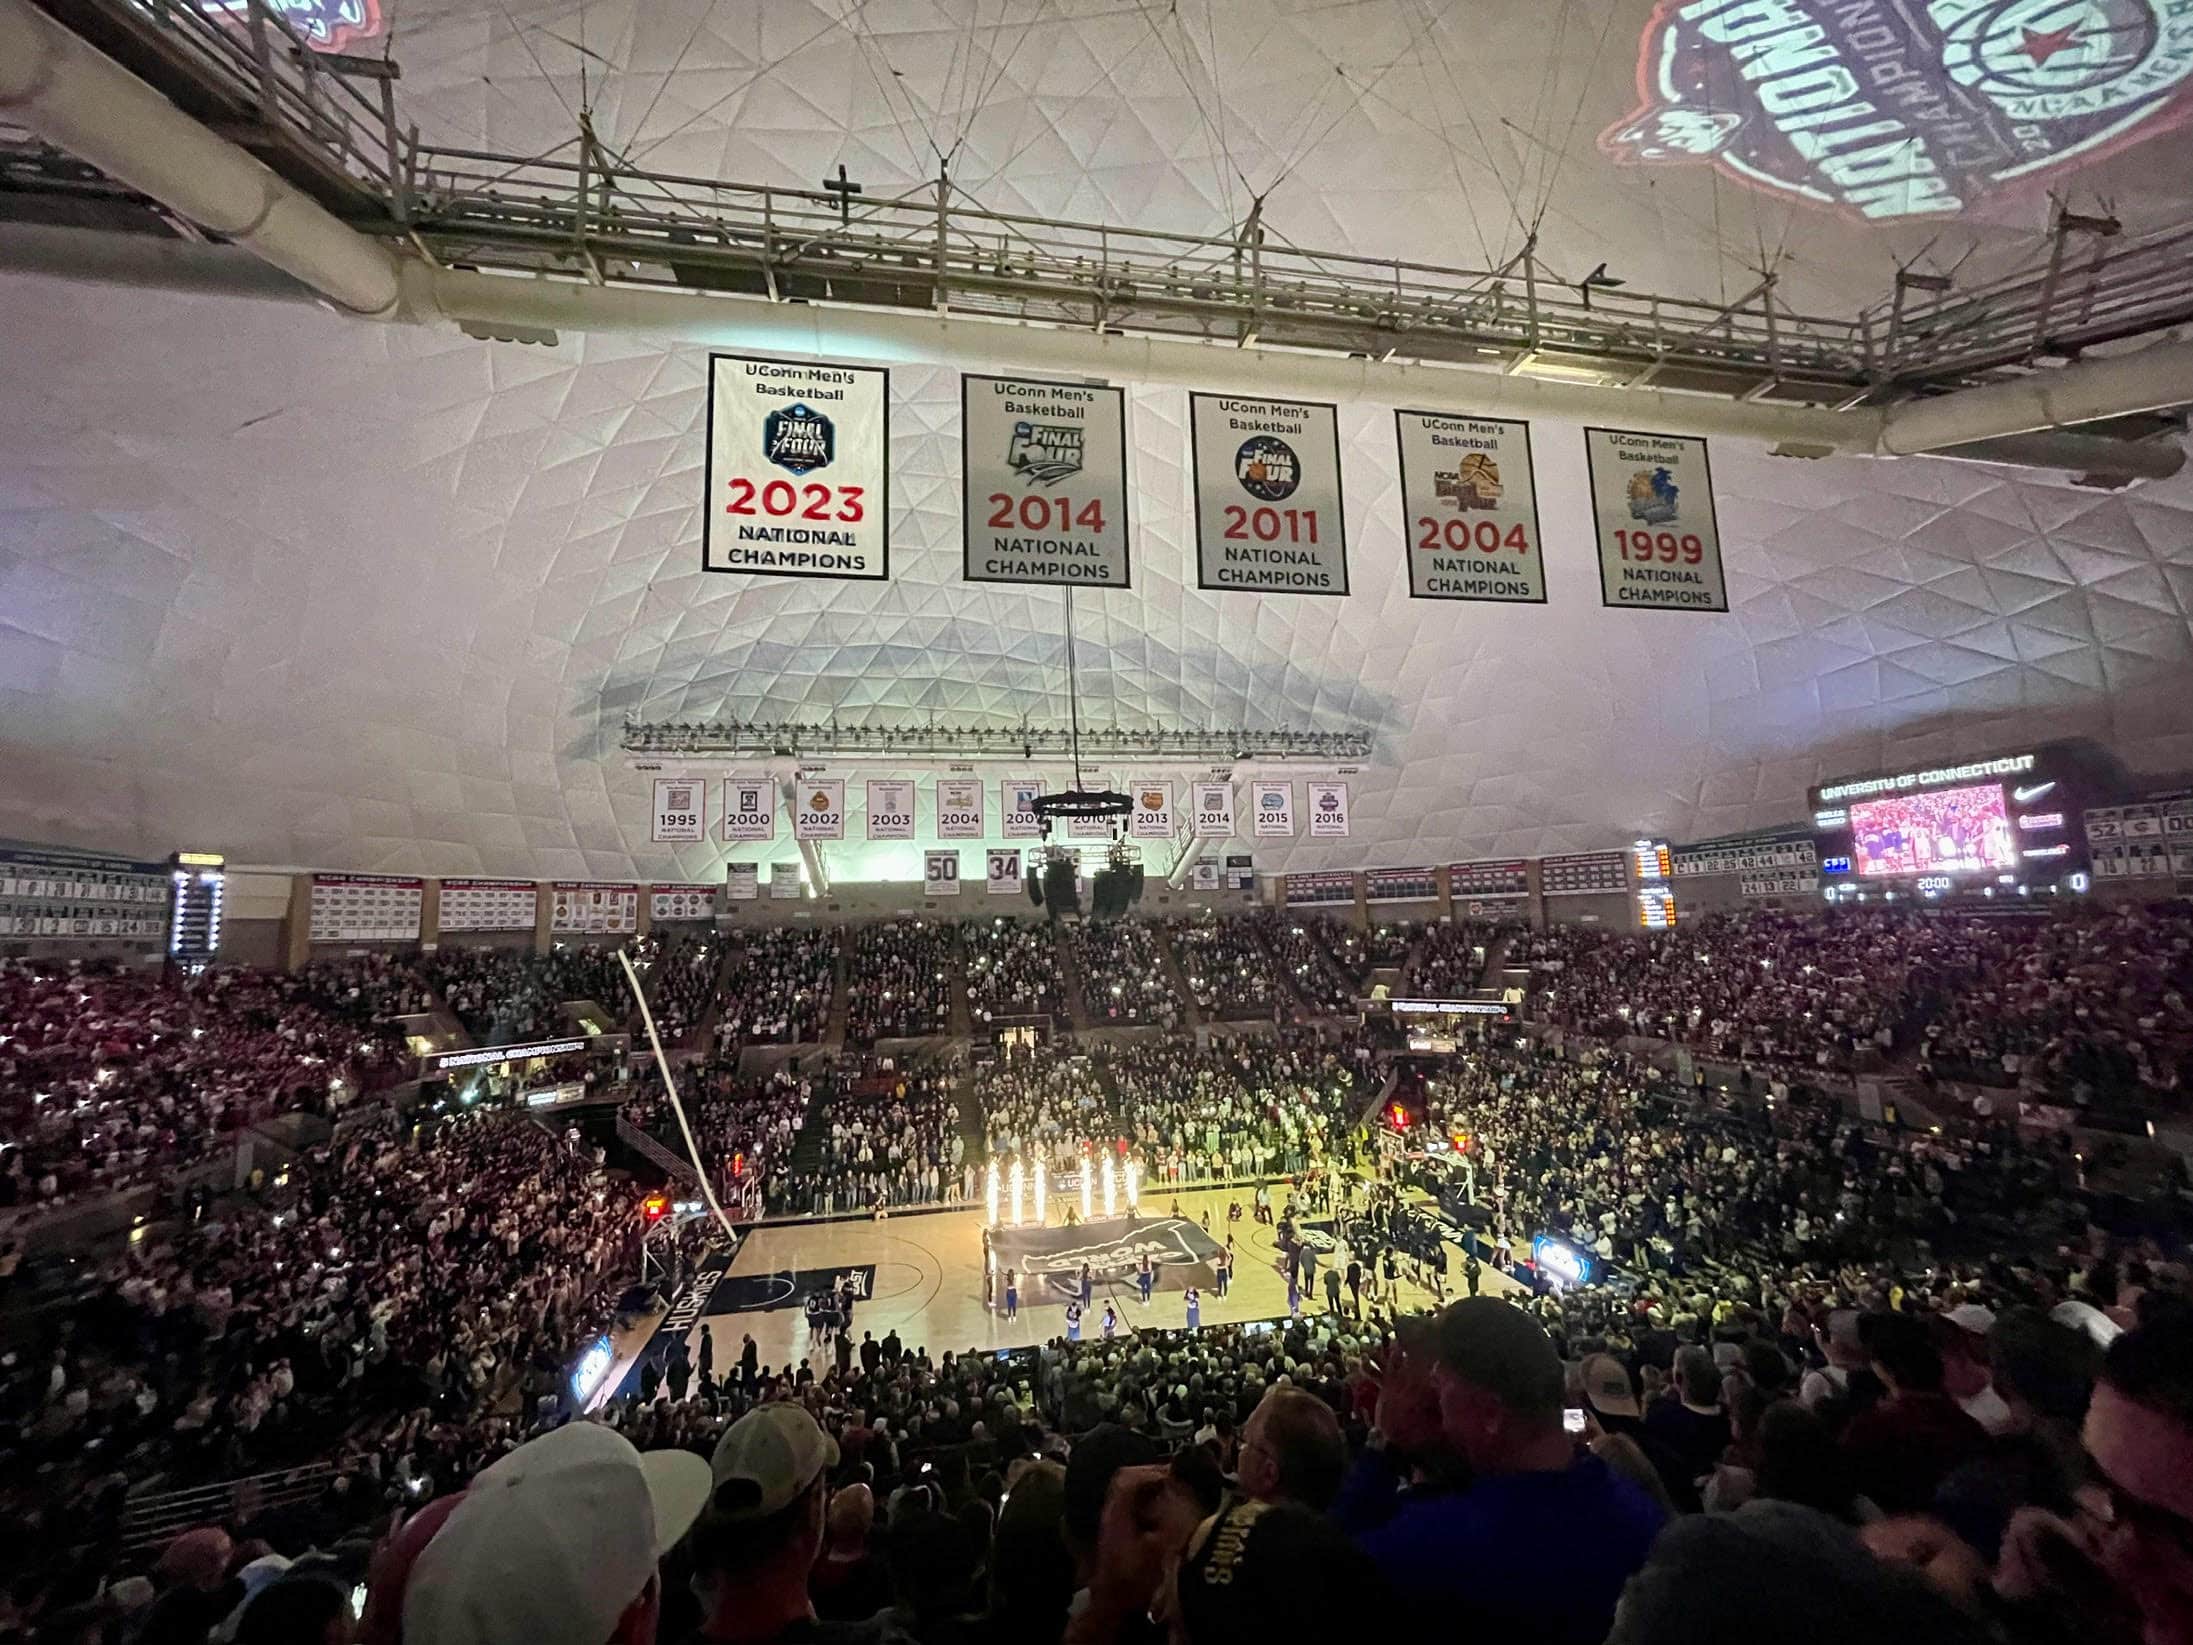 UConn Basketball welcomes their new banner to Storrs with a win over Northern Arizona